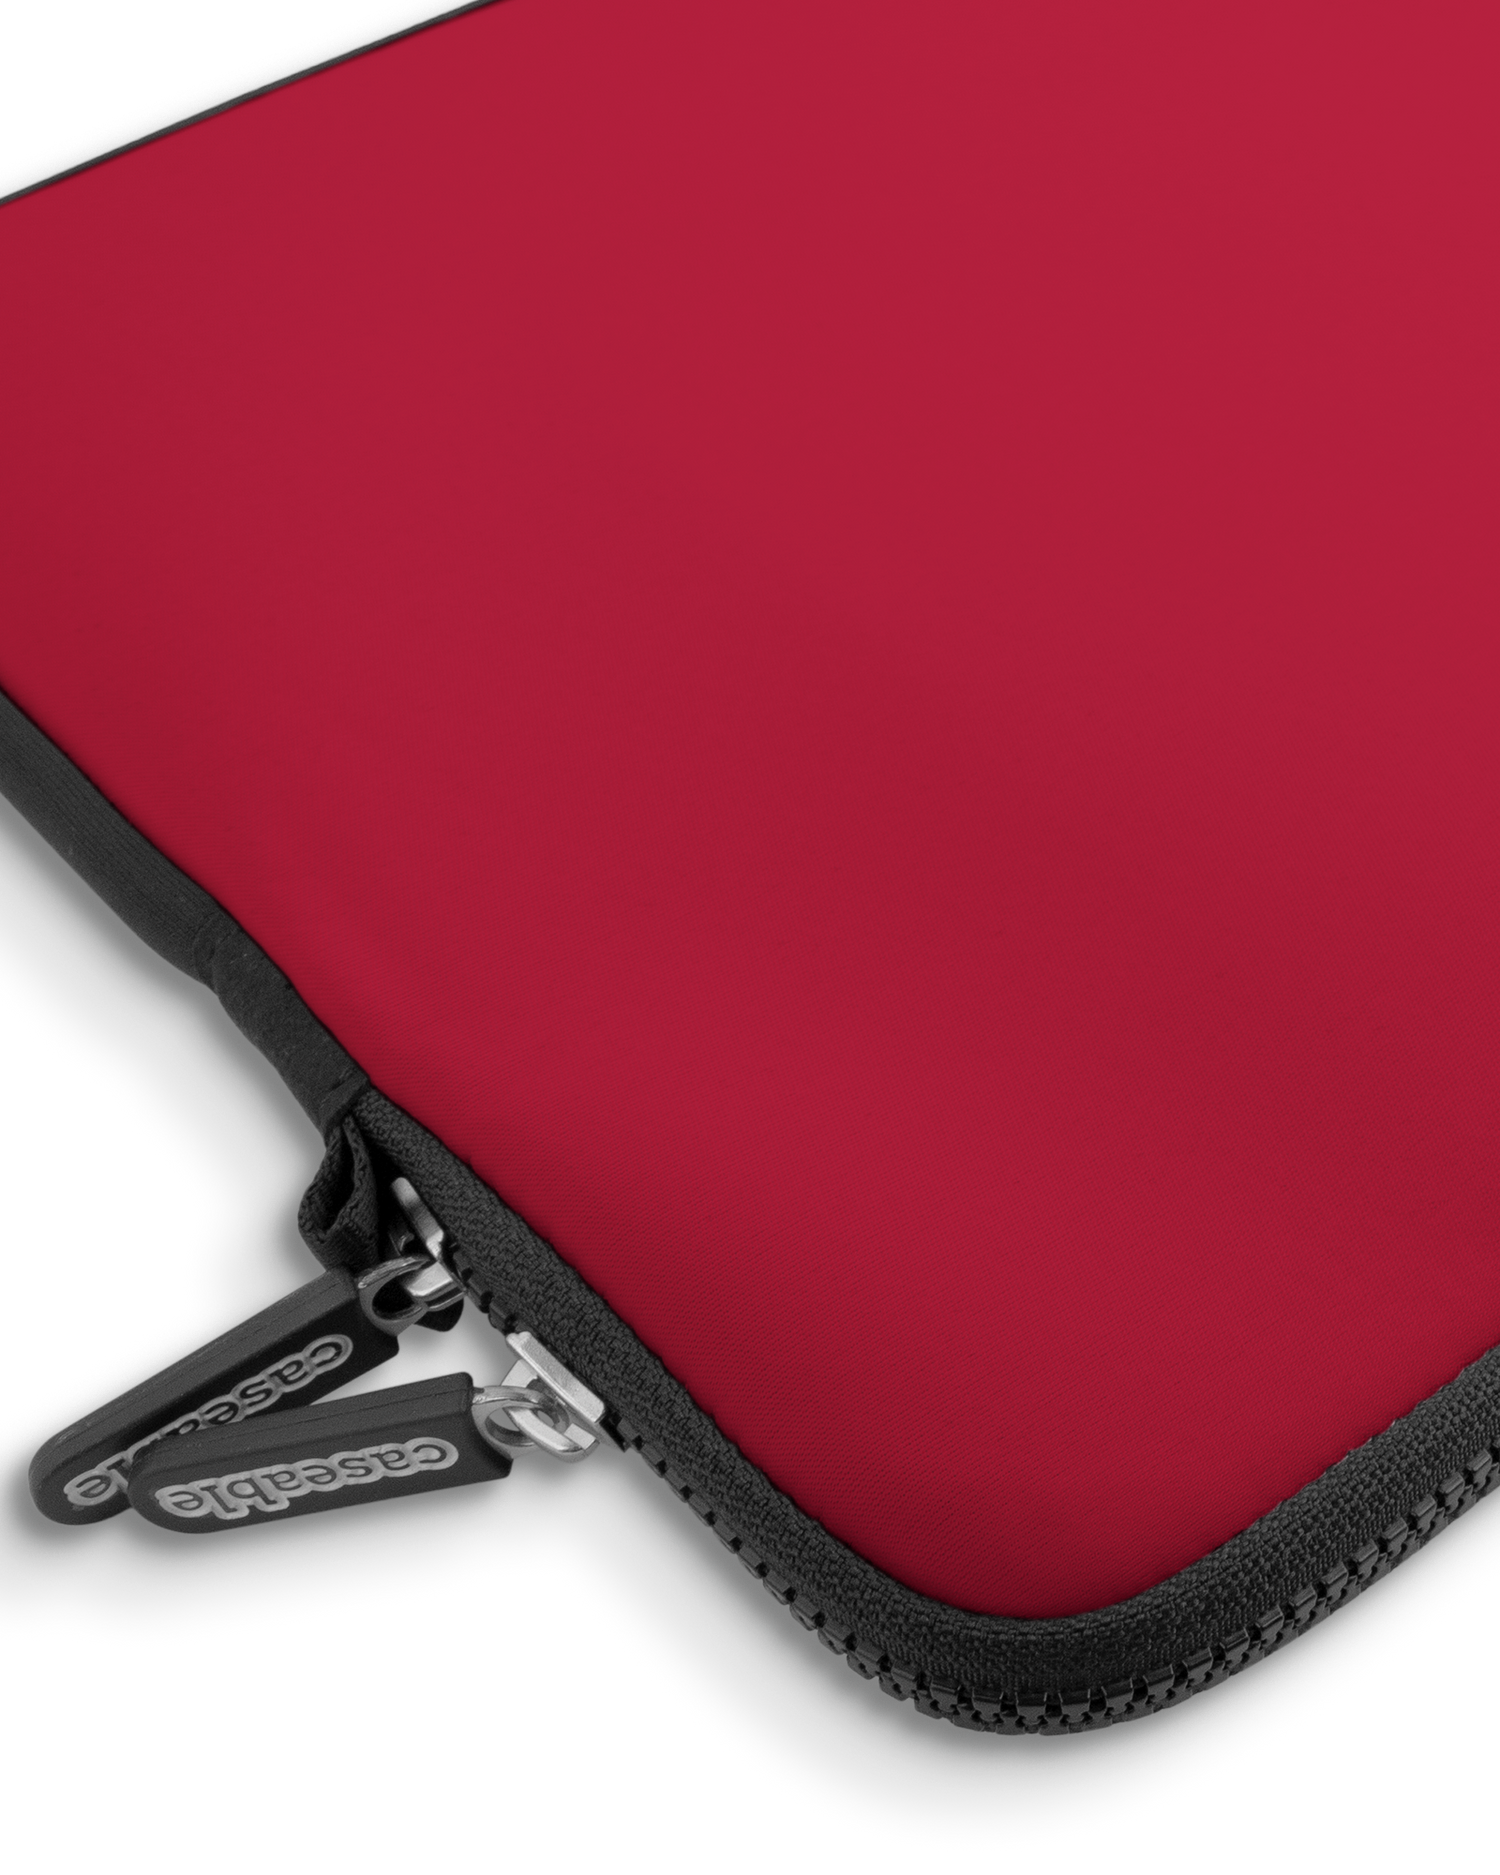 RED Premium Laptop Bag 15 inch with device inside